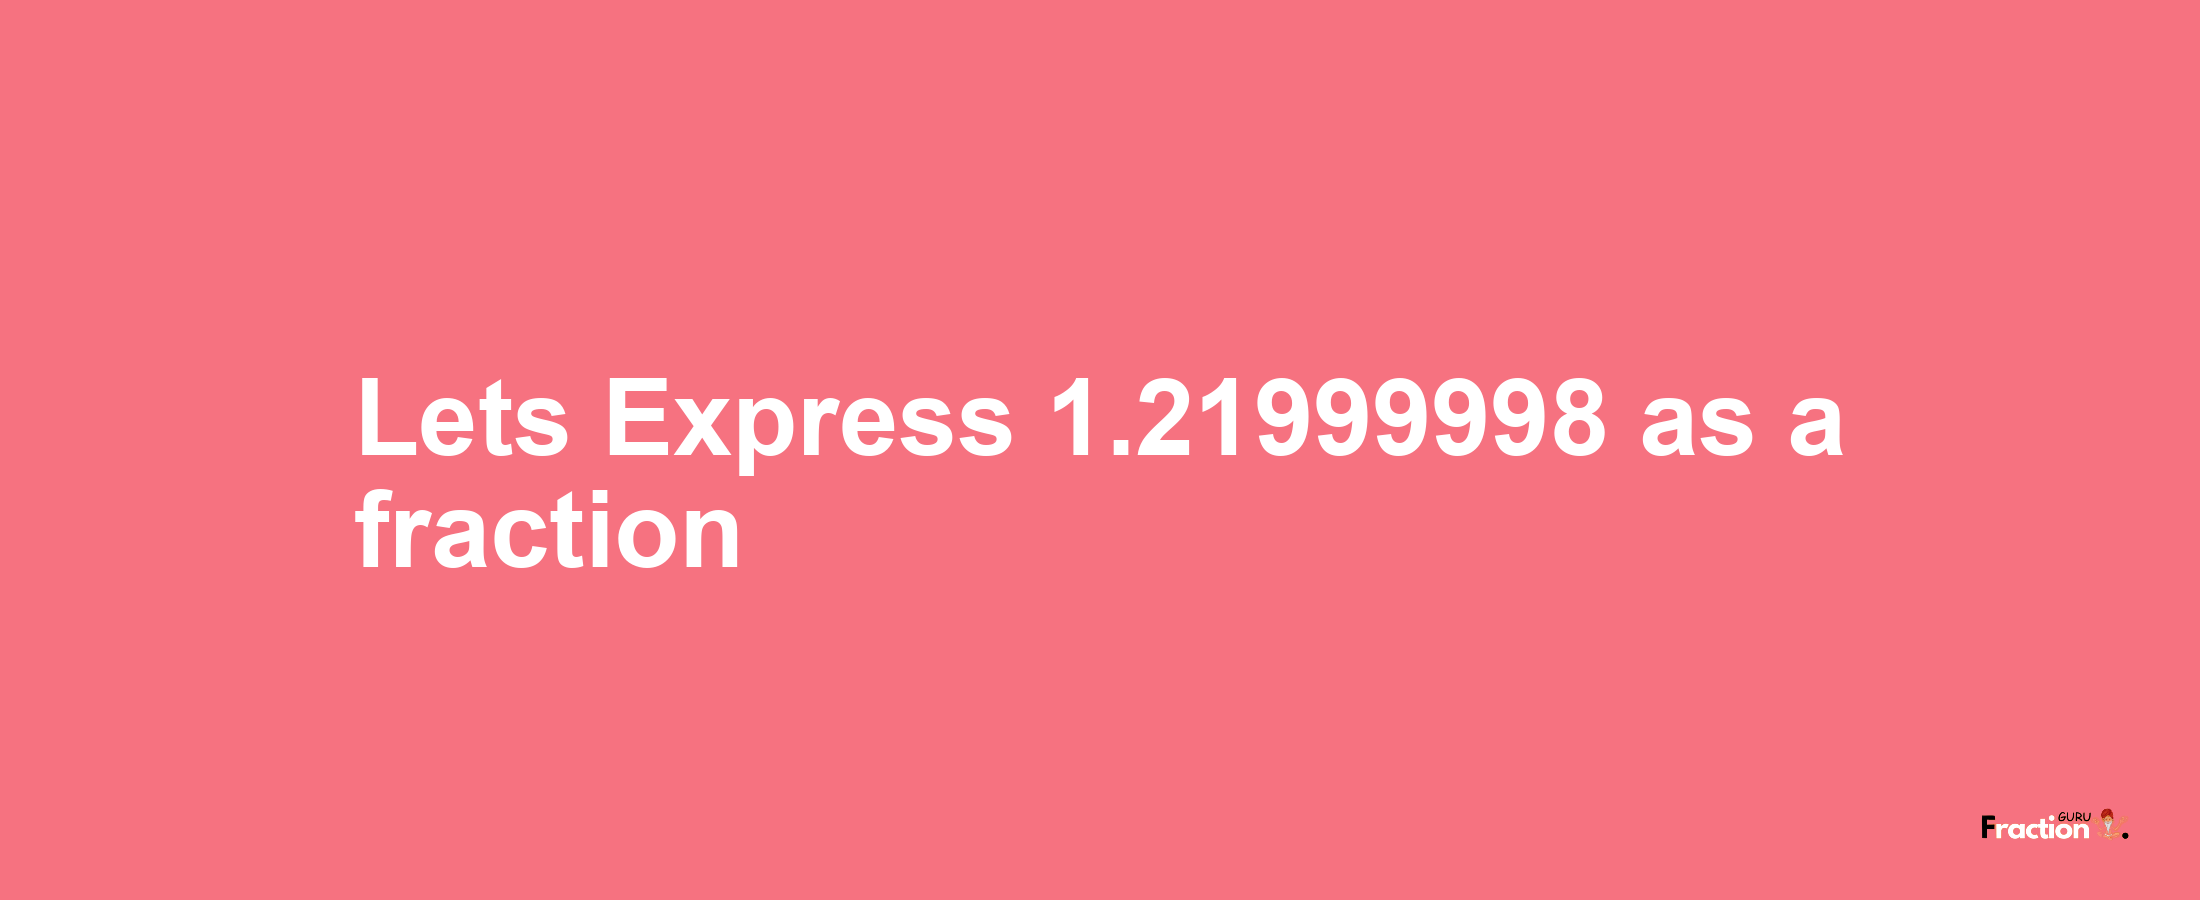 Lets Express 1.21999998 as afraction